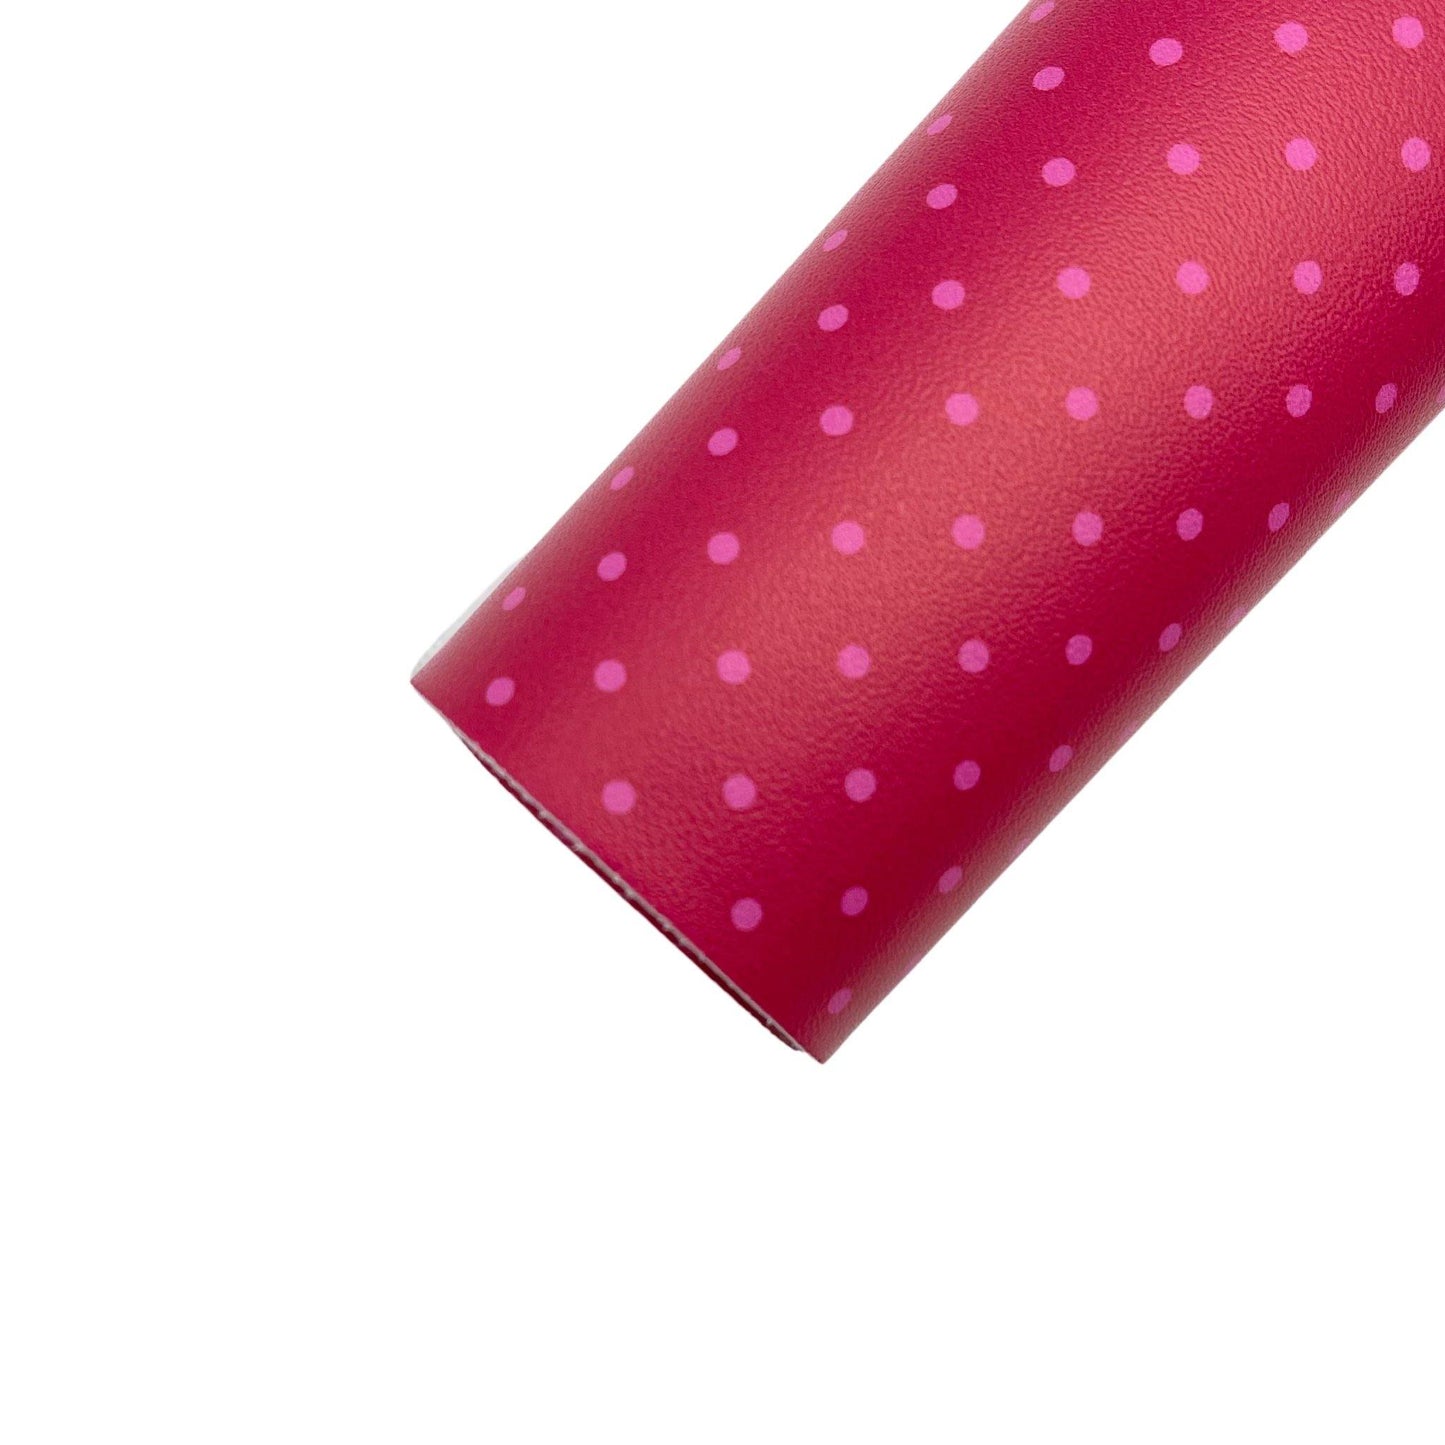 Spring Time Dots | Faux Leather Fabric Sheet - Pretty in Pink Supply